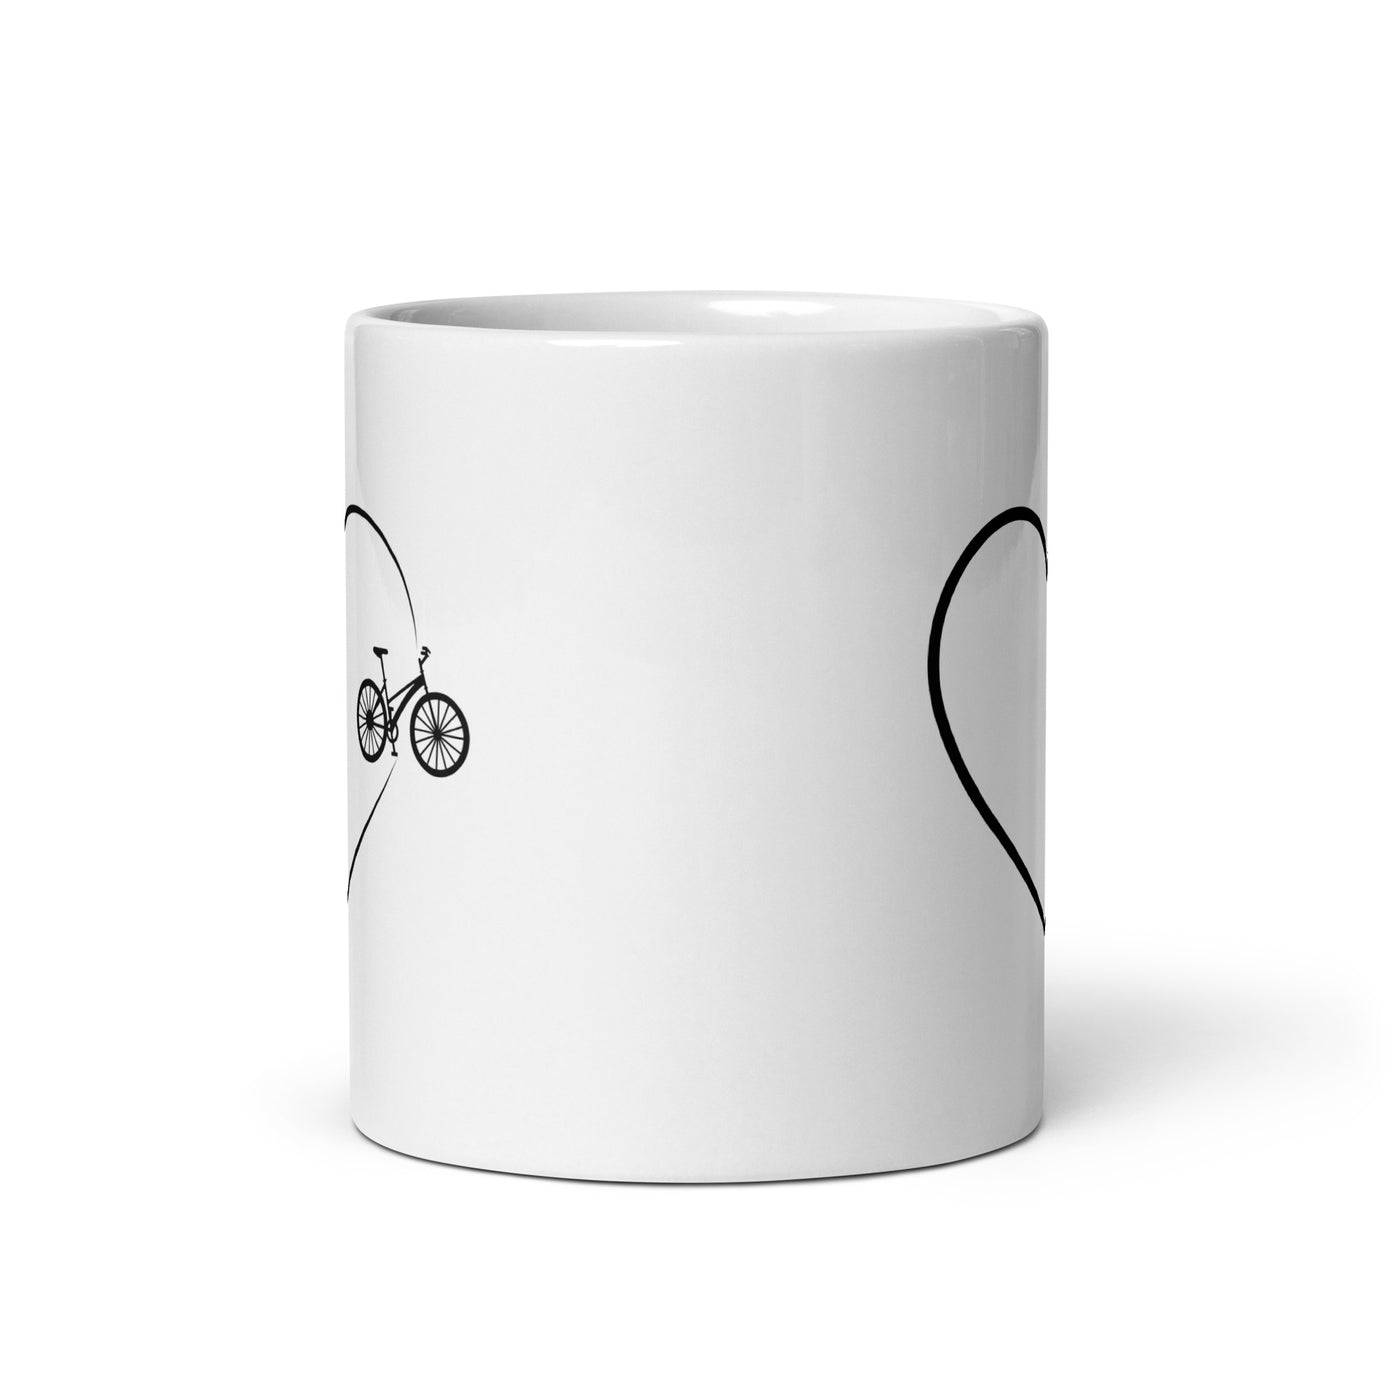 Heart 2 And Bicycle - Tasse fahrrad